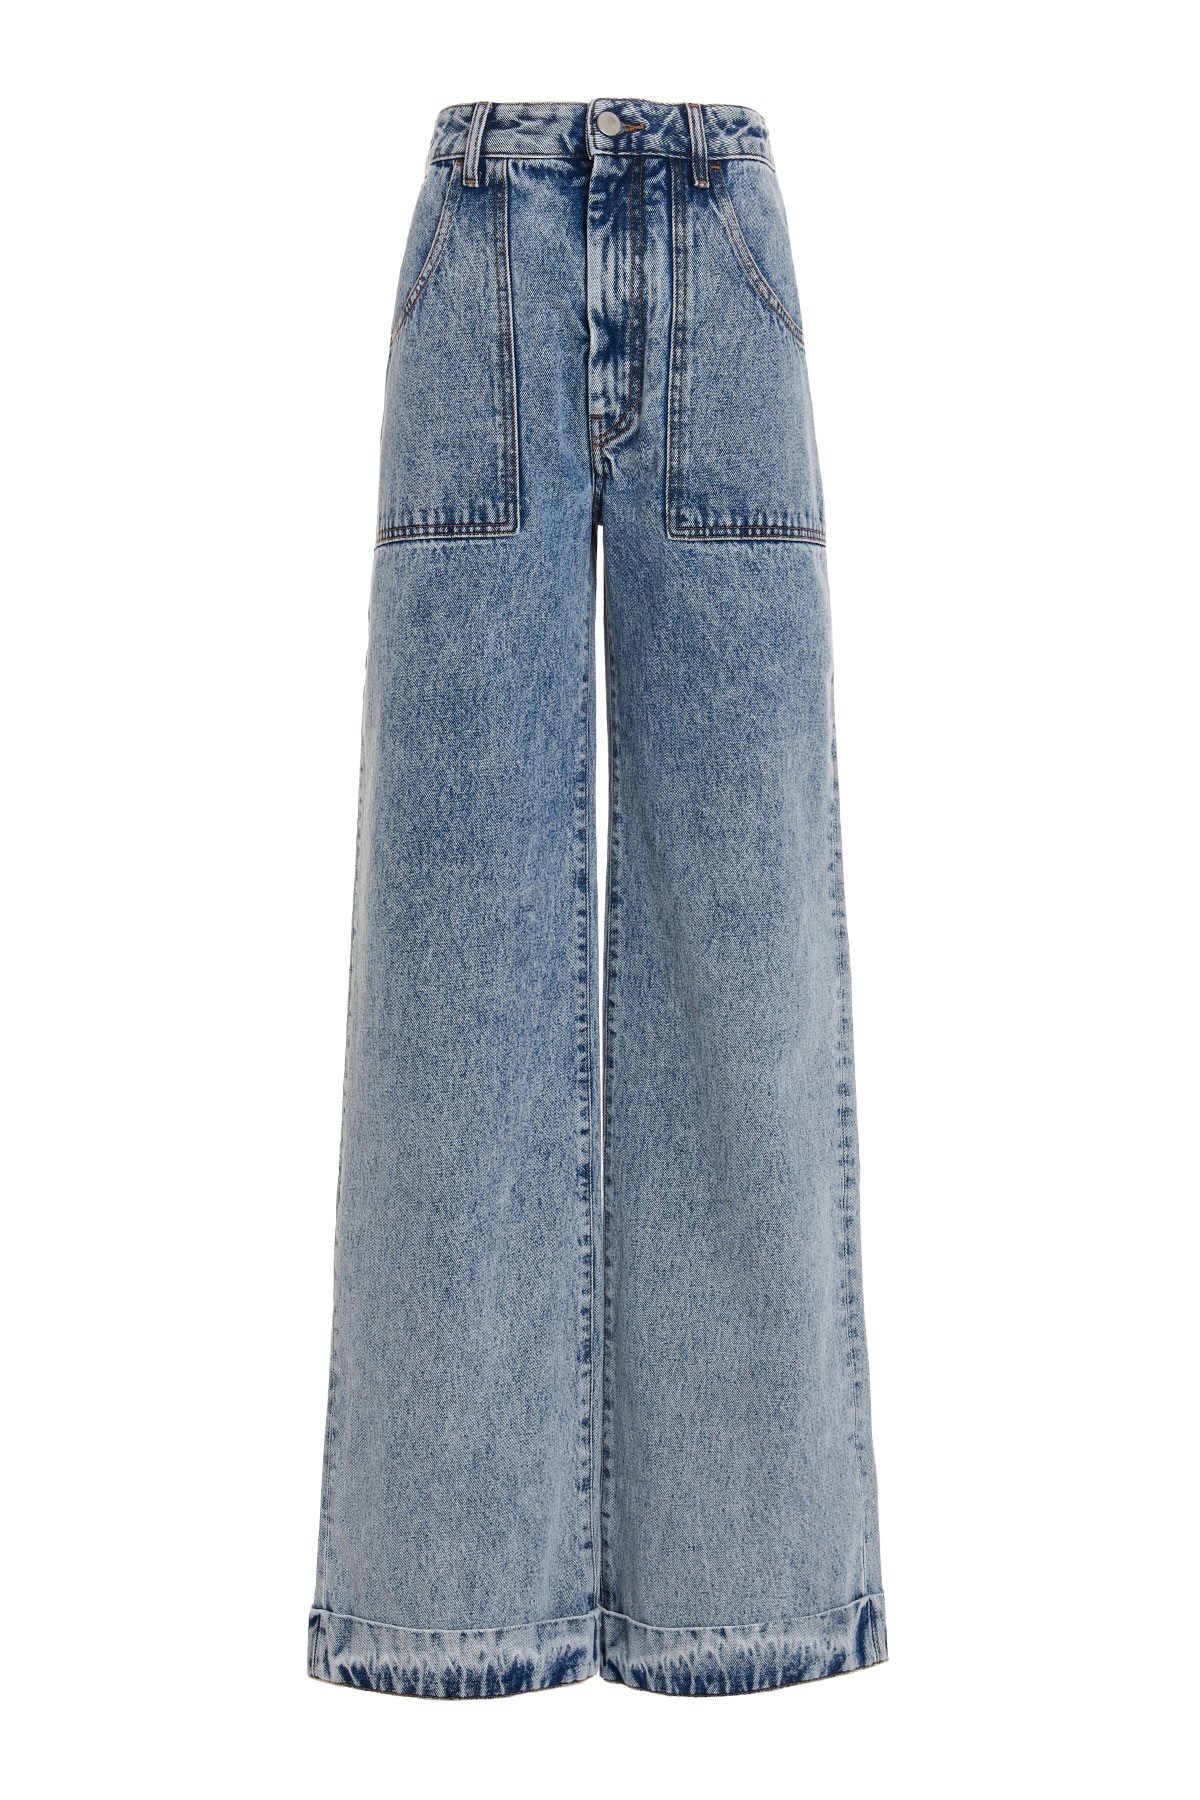 ALESSANDRA RICH Turn-Up Jeans